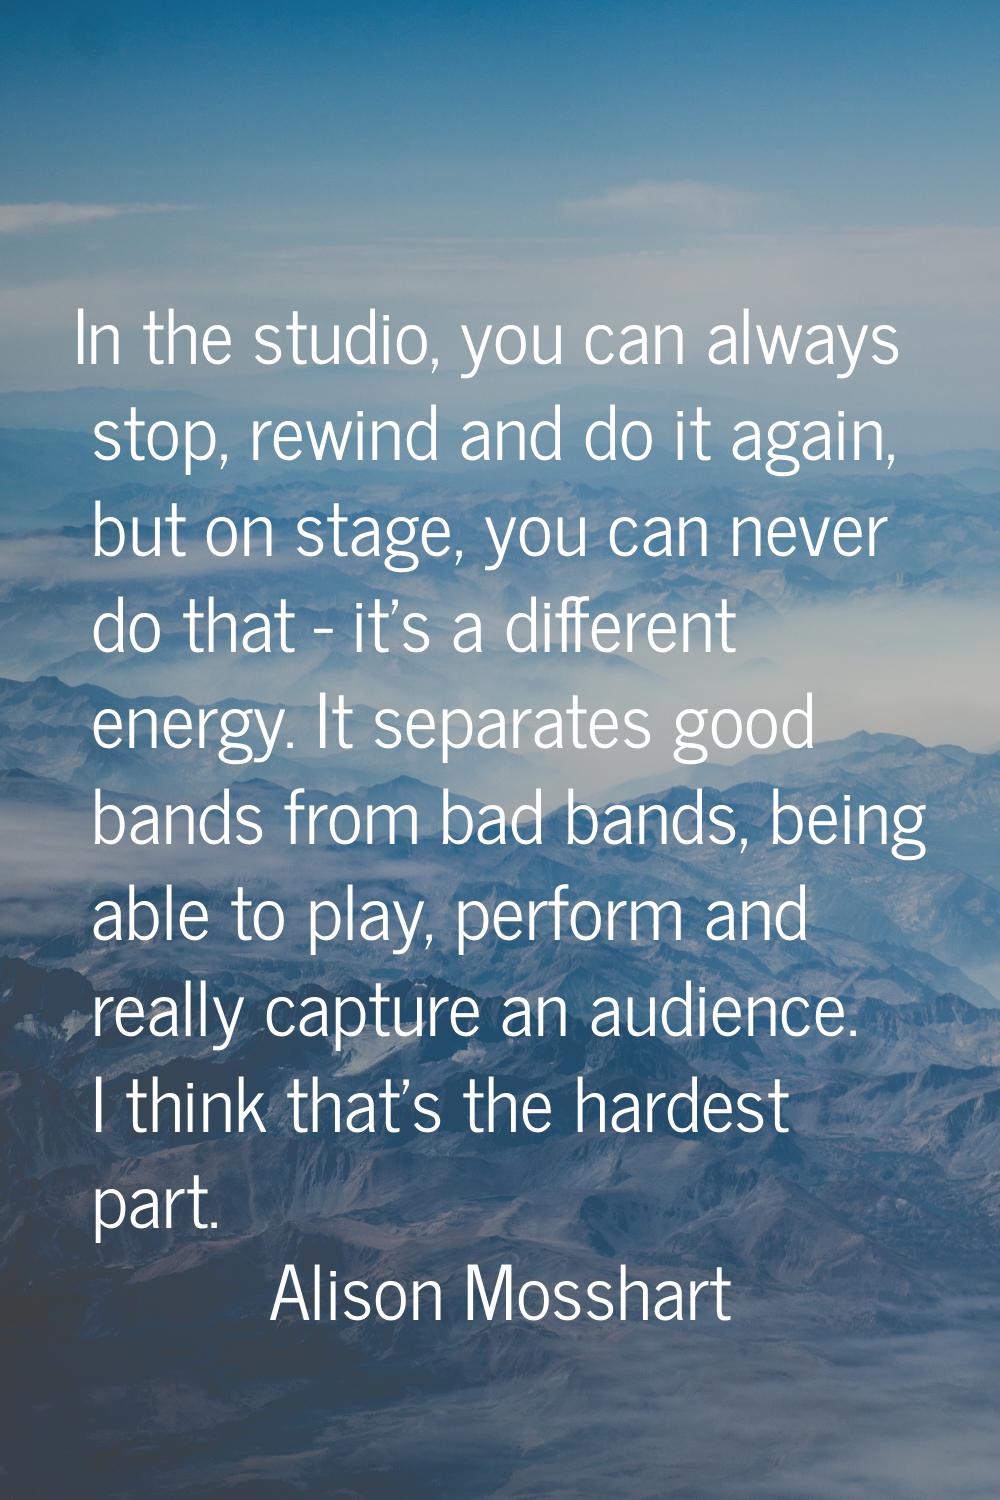 In the studio, you can always stop, rewind and do it again, but on stage, you can never do that - i